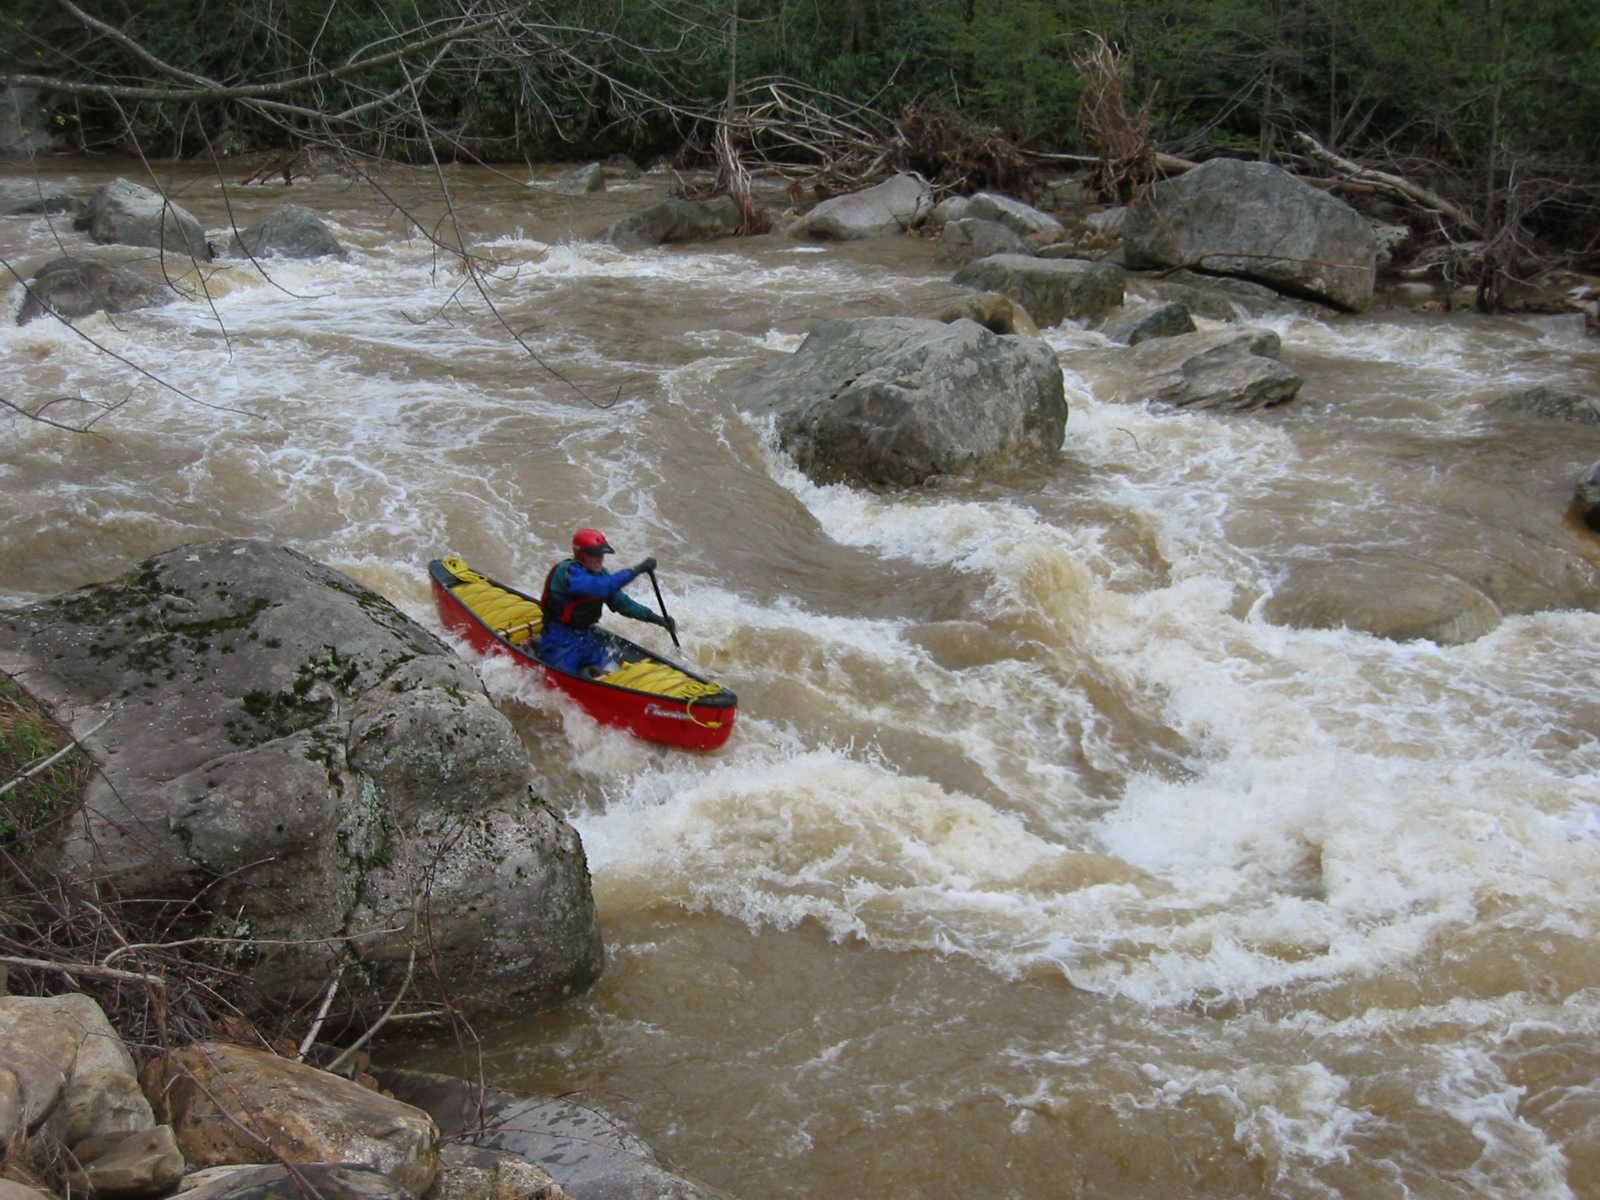 Scott Gravatt trying to avoid main hole in the big South Fork rapid (Photo by Lou Campagna - 4/26/04)